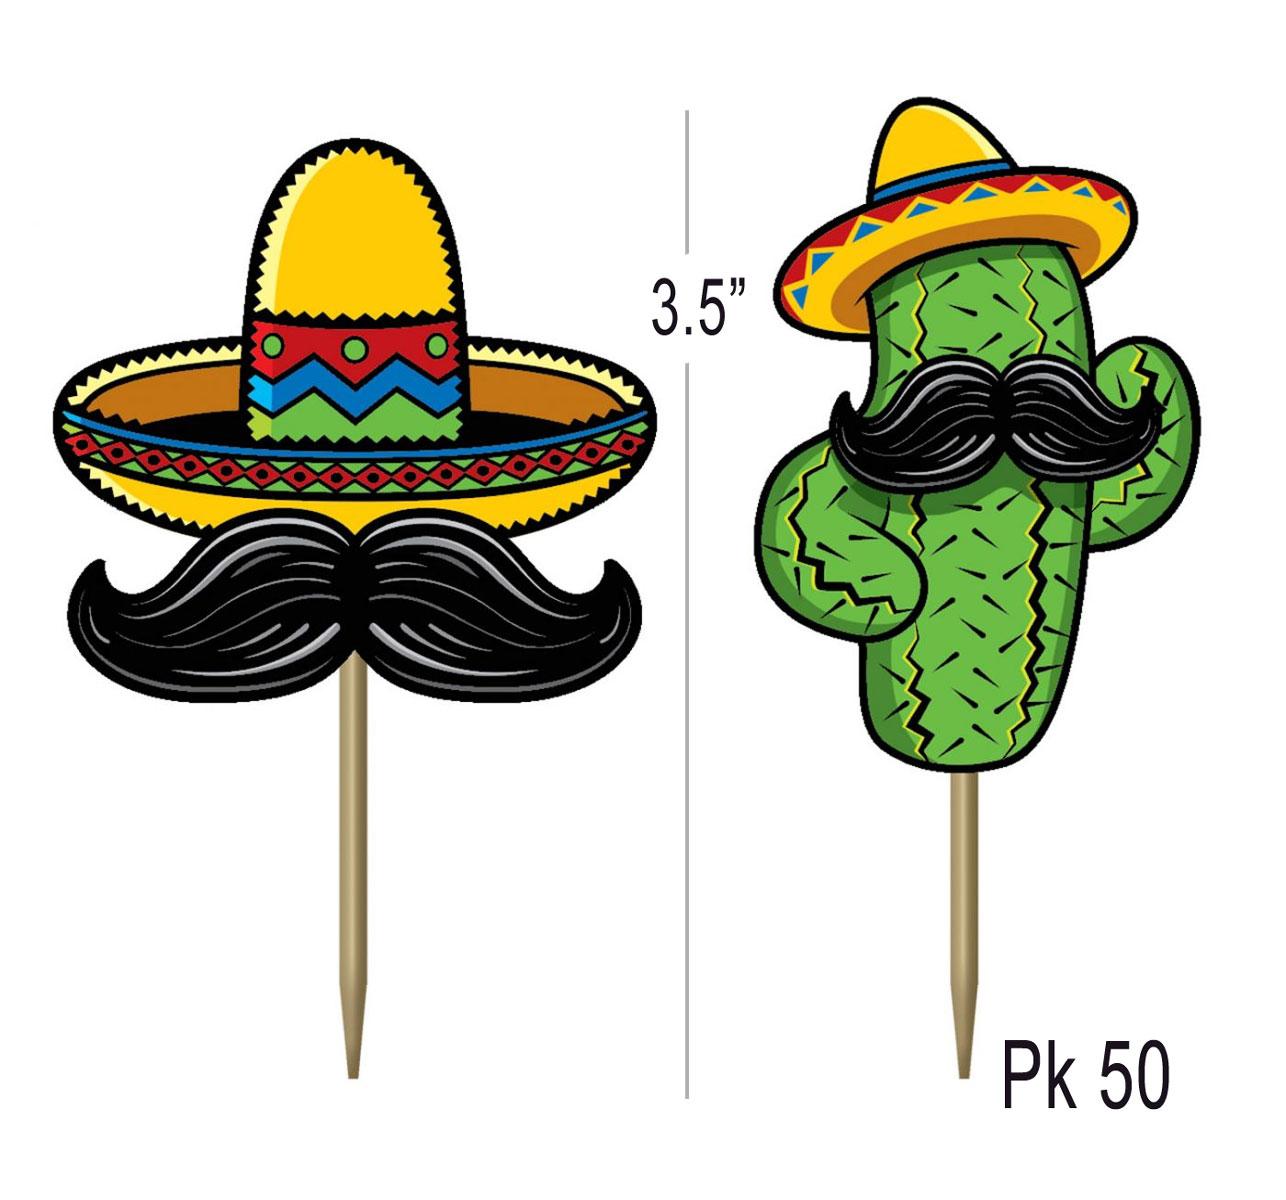 Colourful Mexican Fiesta party picks or Sandwich flags by Biestle 60661 available here at Karnival Costumes online party shop